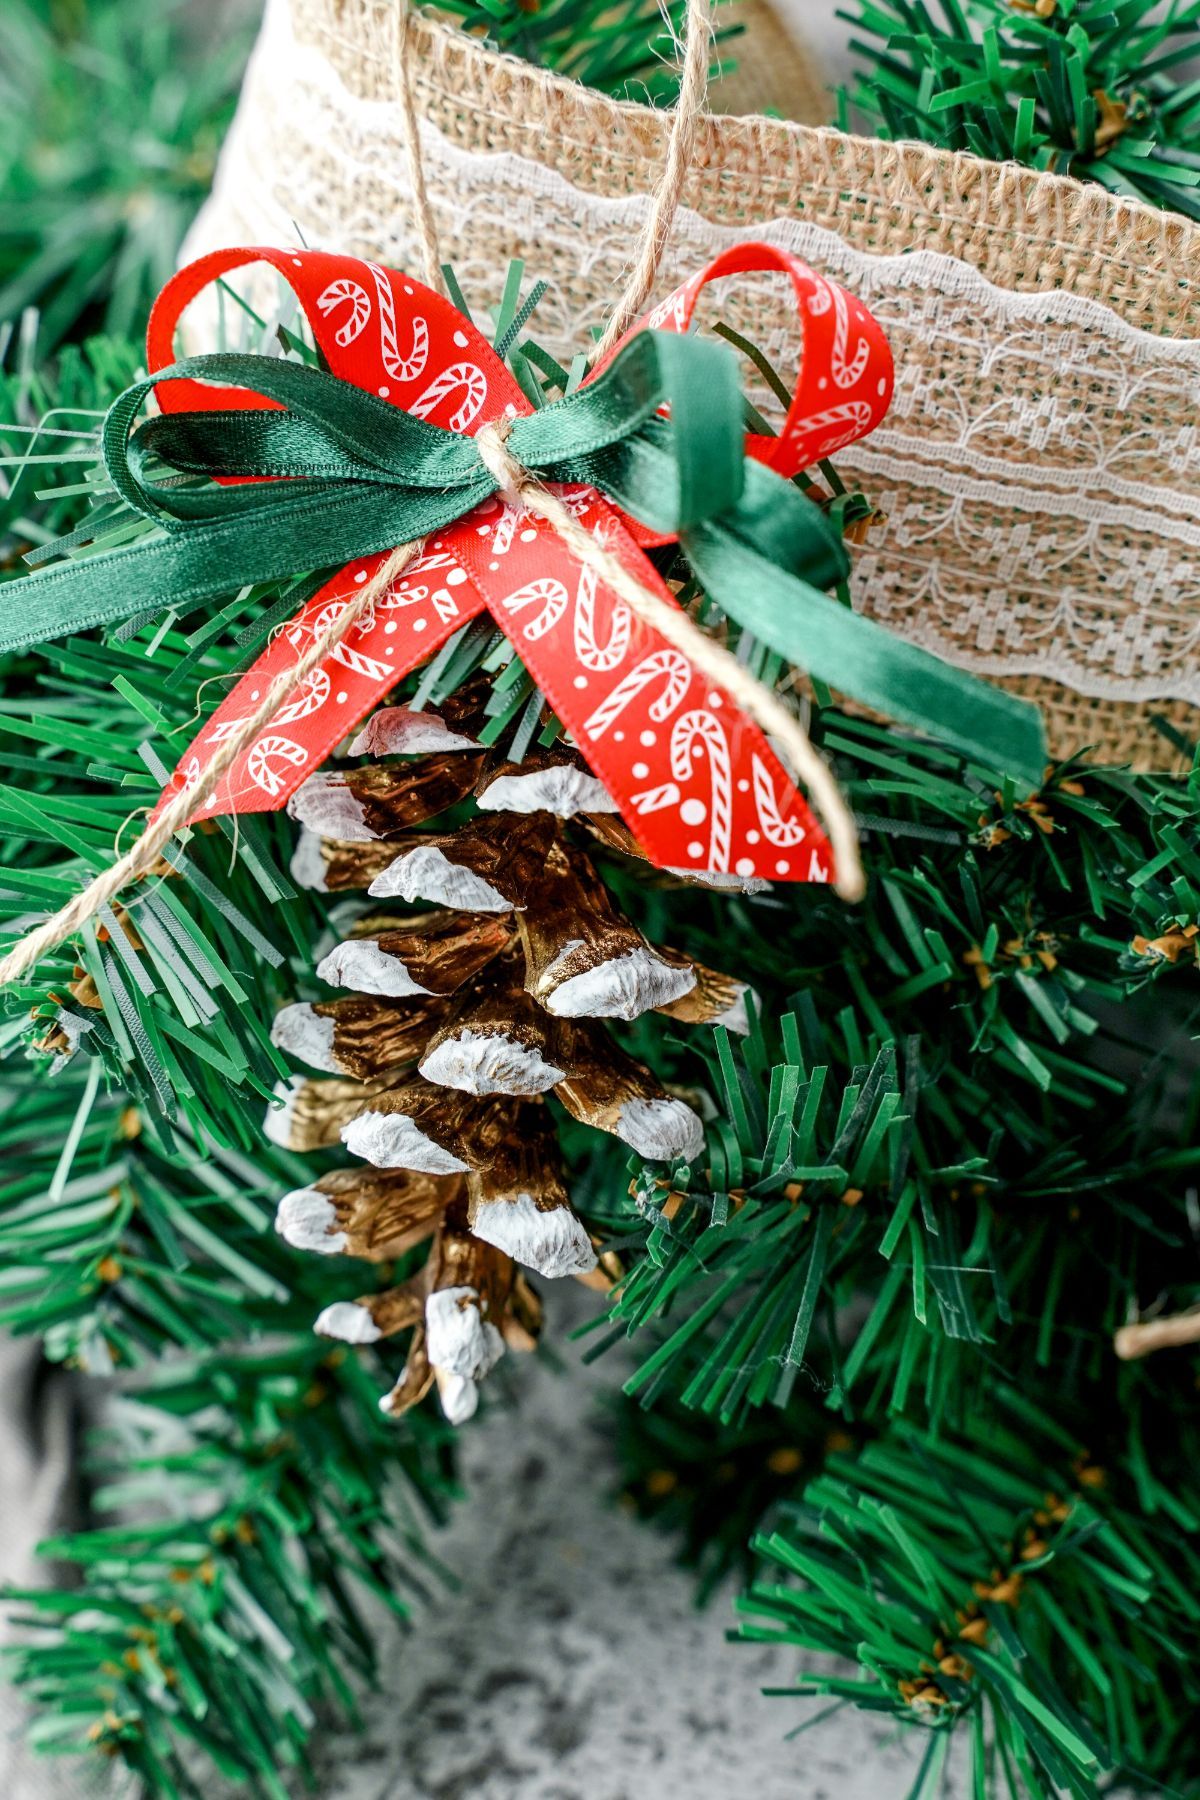 Burlap lace on fake tree with pinecone ornament hanging